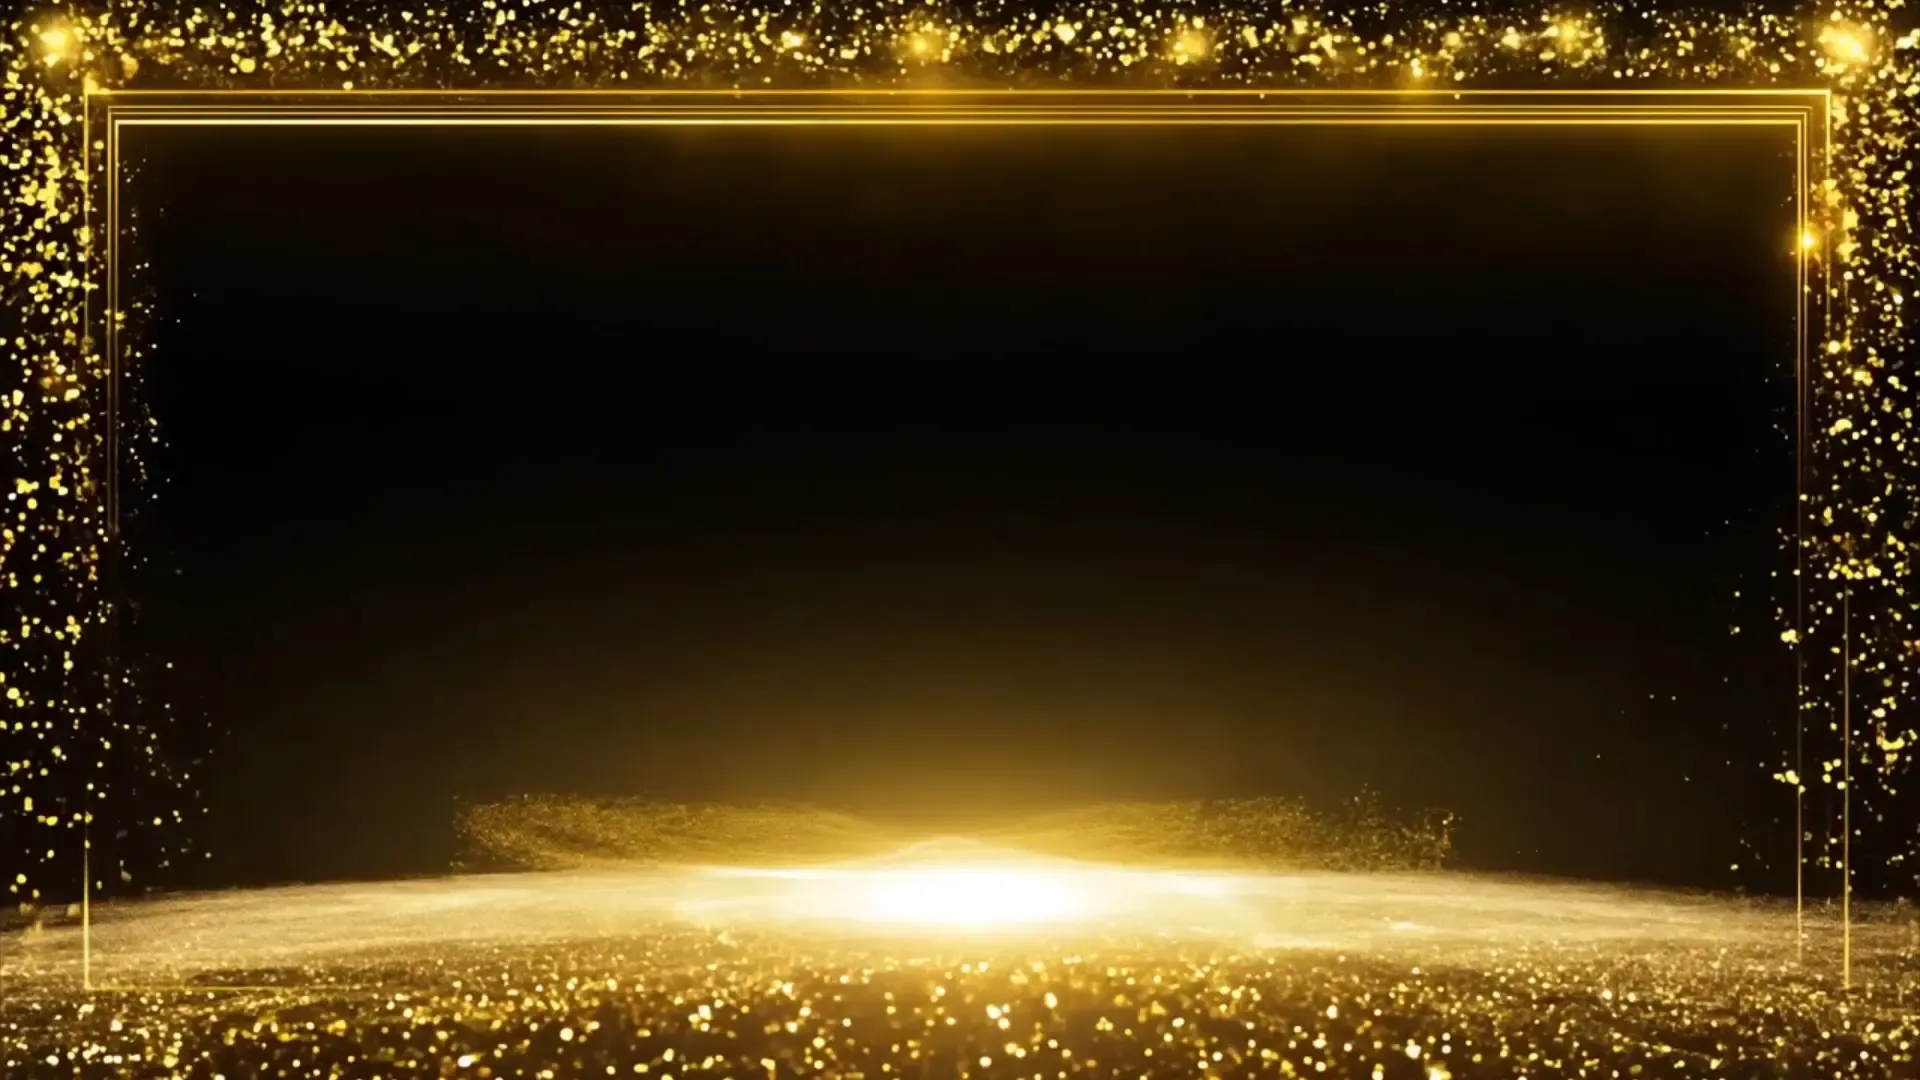 Sparkling Gold Particles Overlay for Award Ceremony Videos